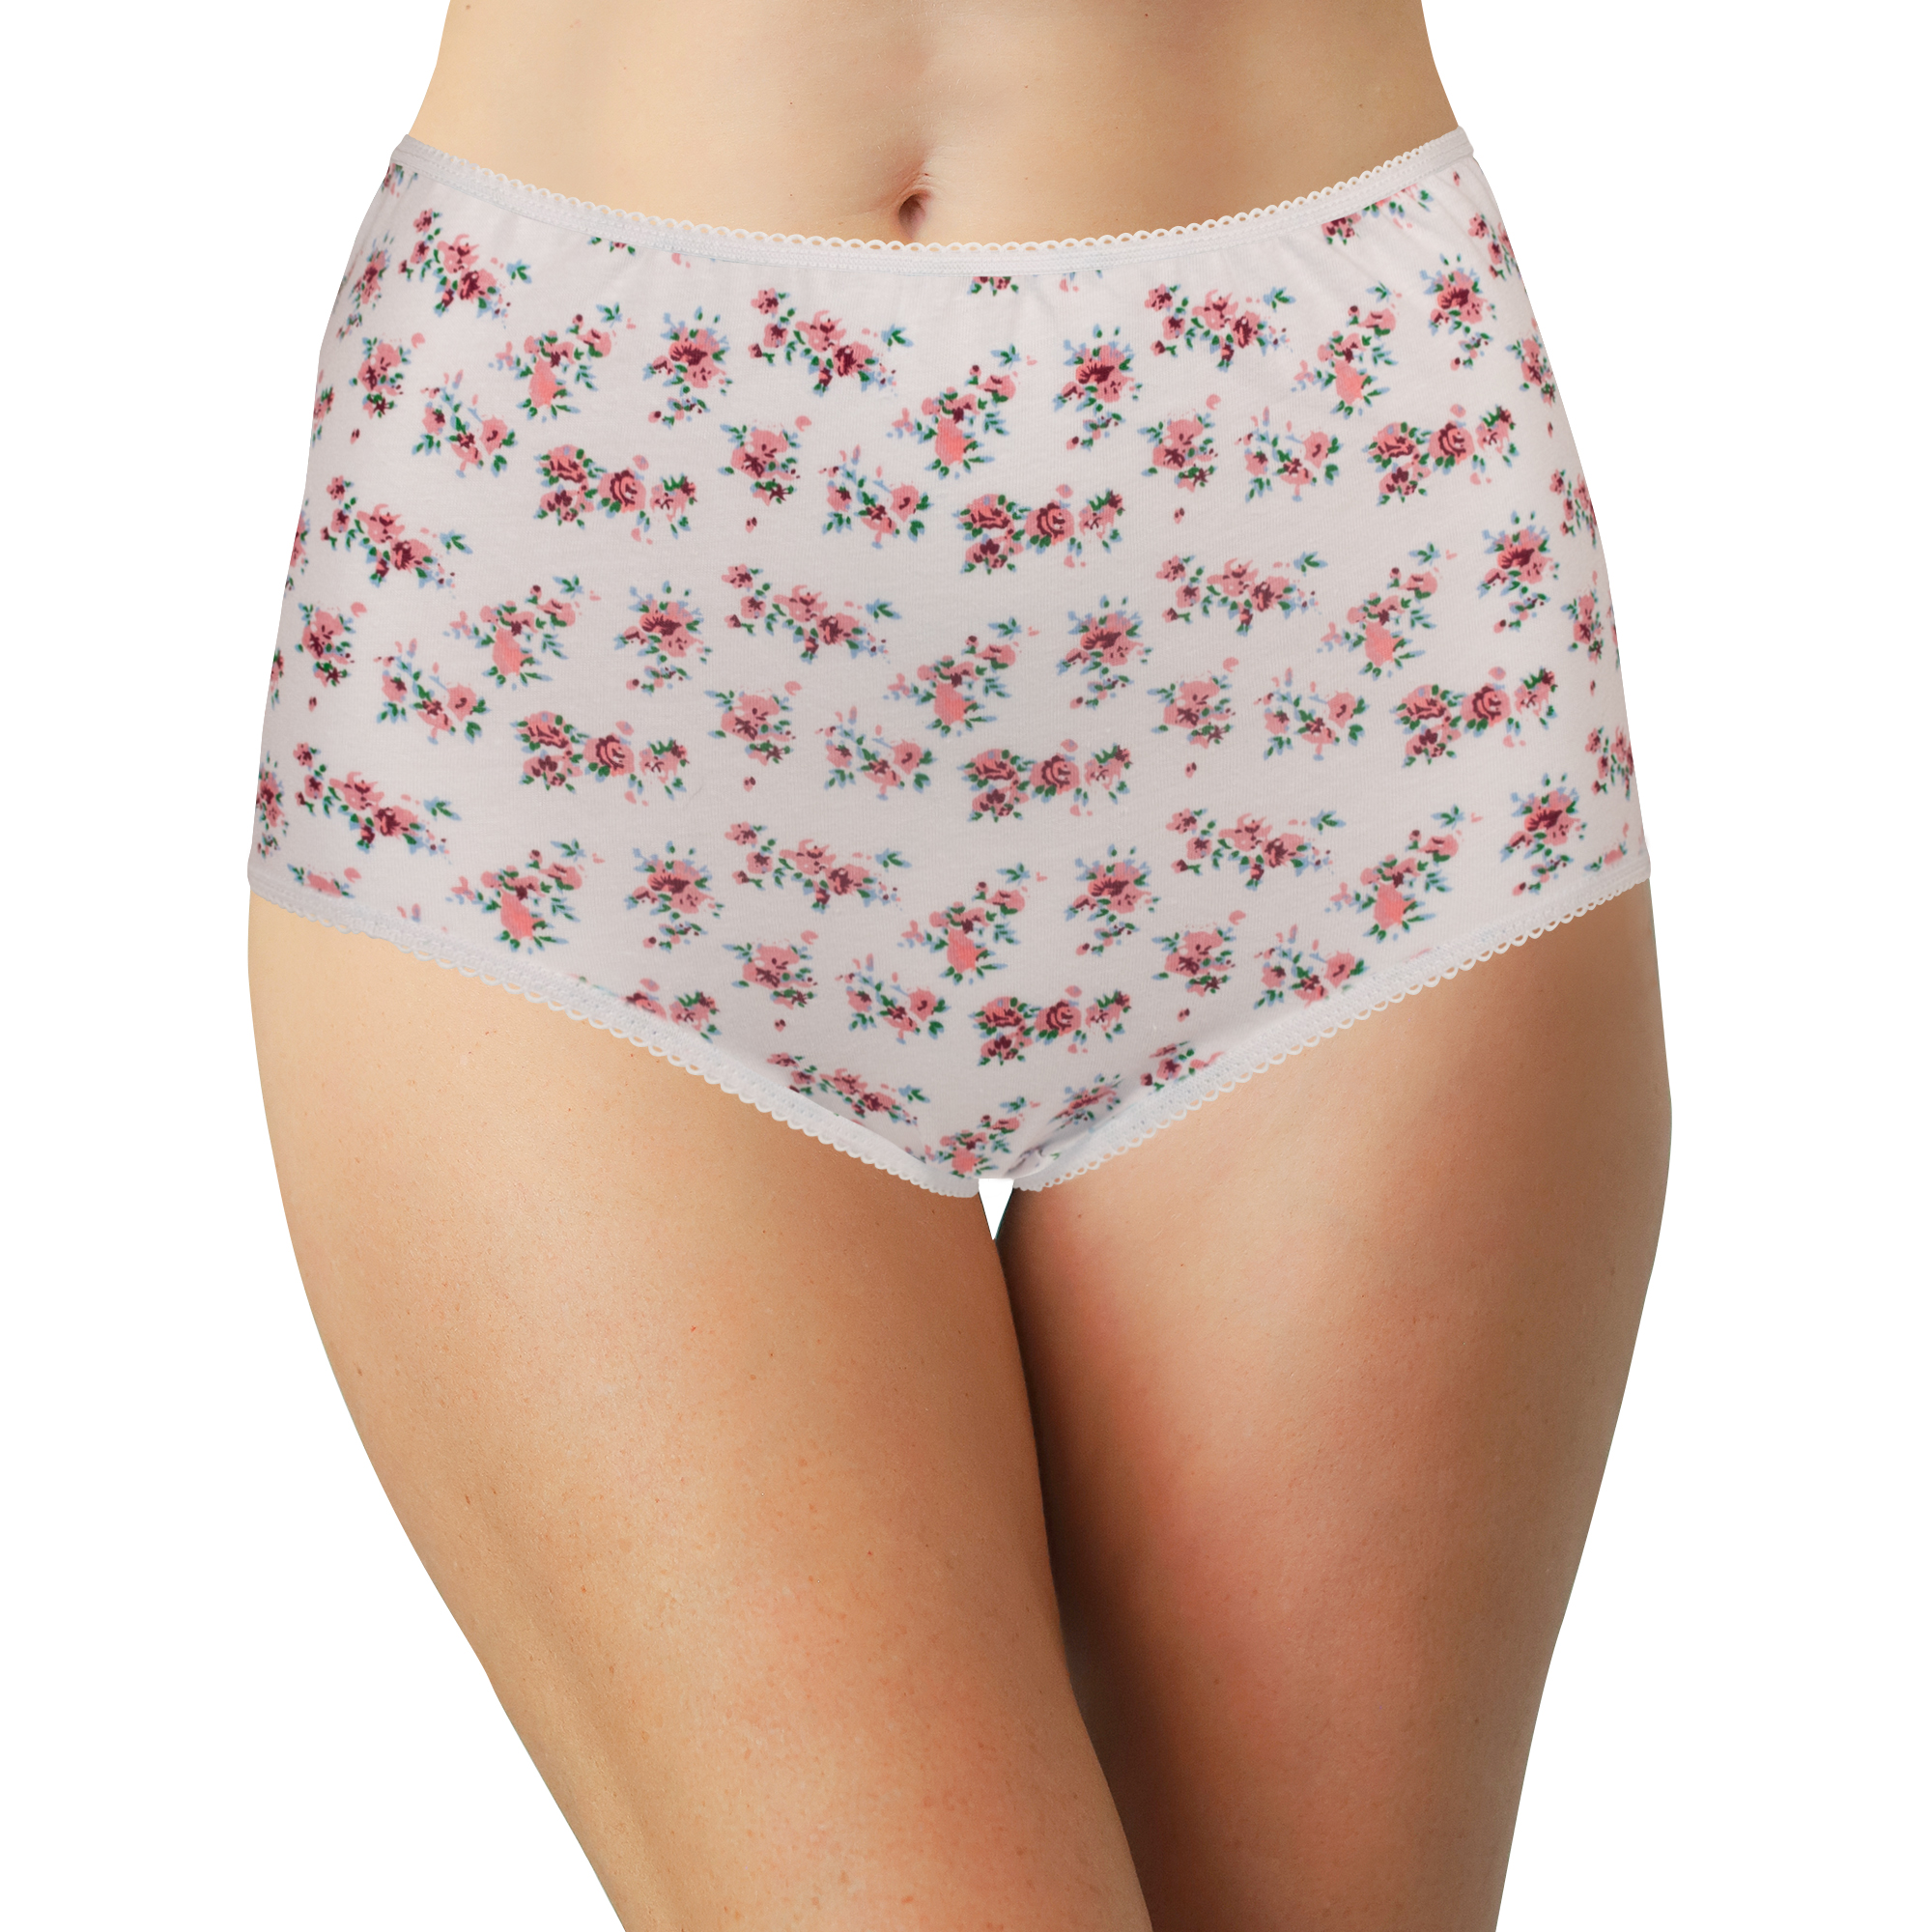 Teri Full Coverage Cotton Panty Floral Print 6 Pack- Style 15001A - Basics  by Mail